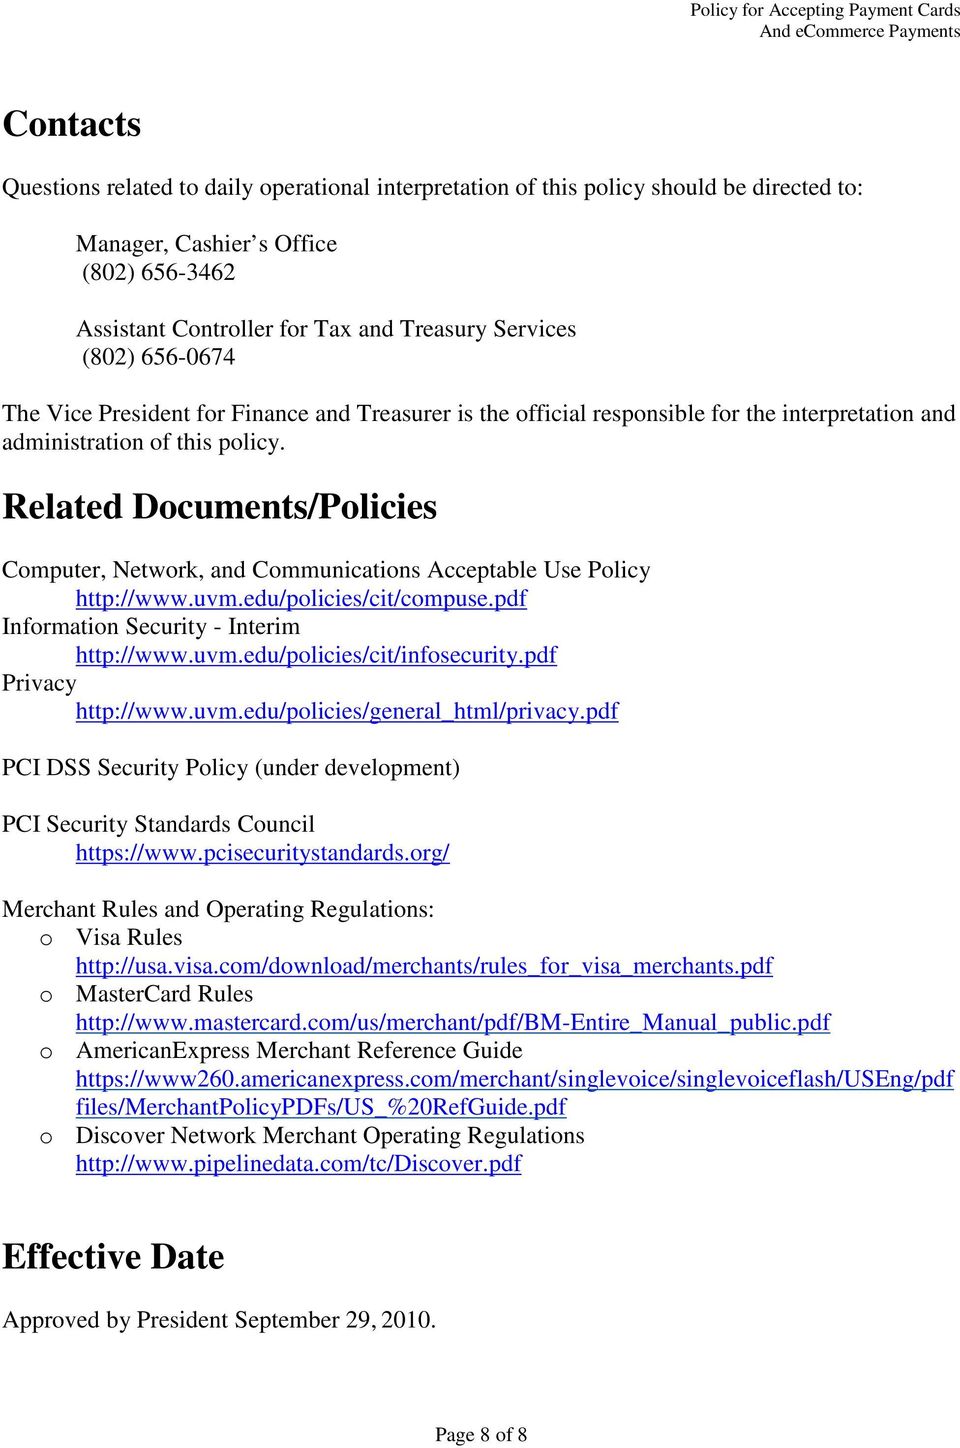 Related Documents/Policies Computer, Network, and Communications Acceptable Use Policy http://www.uvm.edu/policies/cit/compuse.pdf Information Security - Interim http://www.uvm.edu/policies/cit/infosecurity.